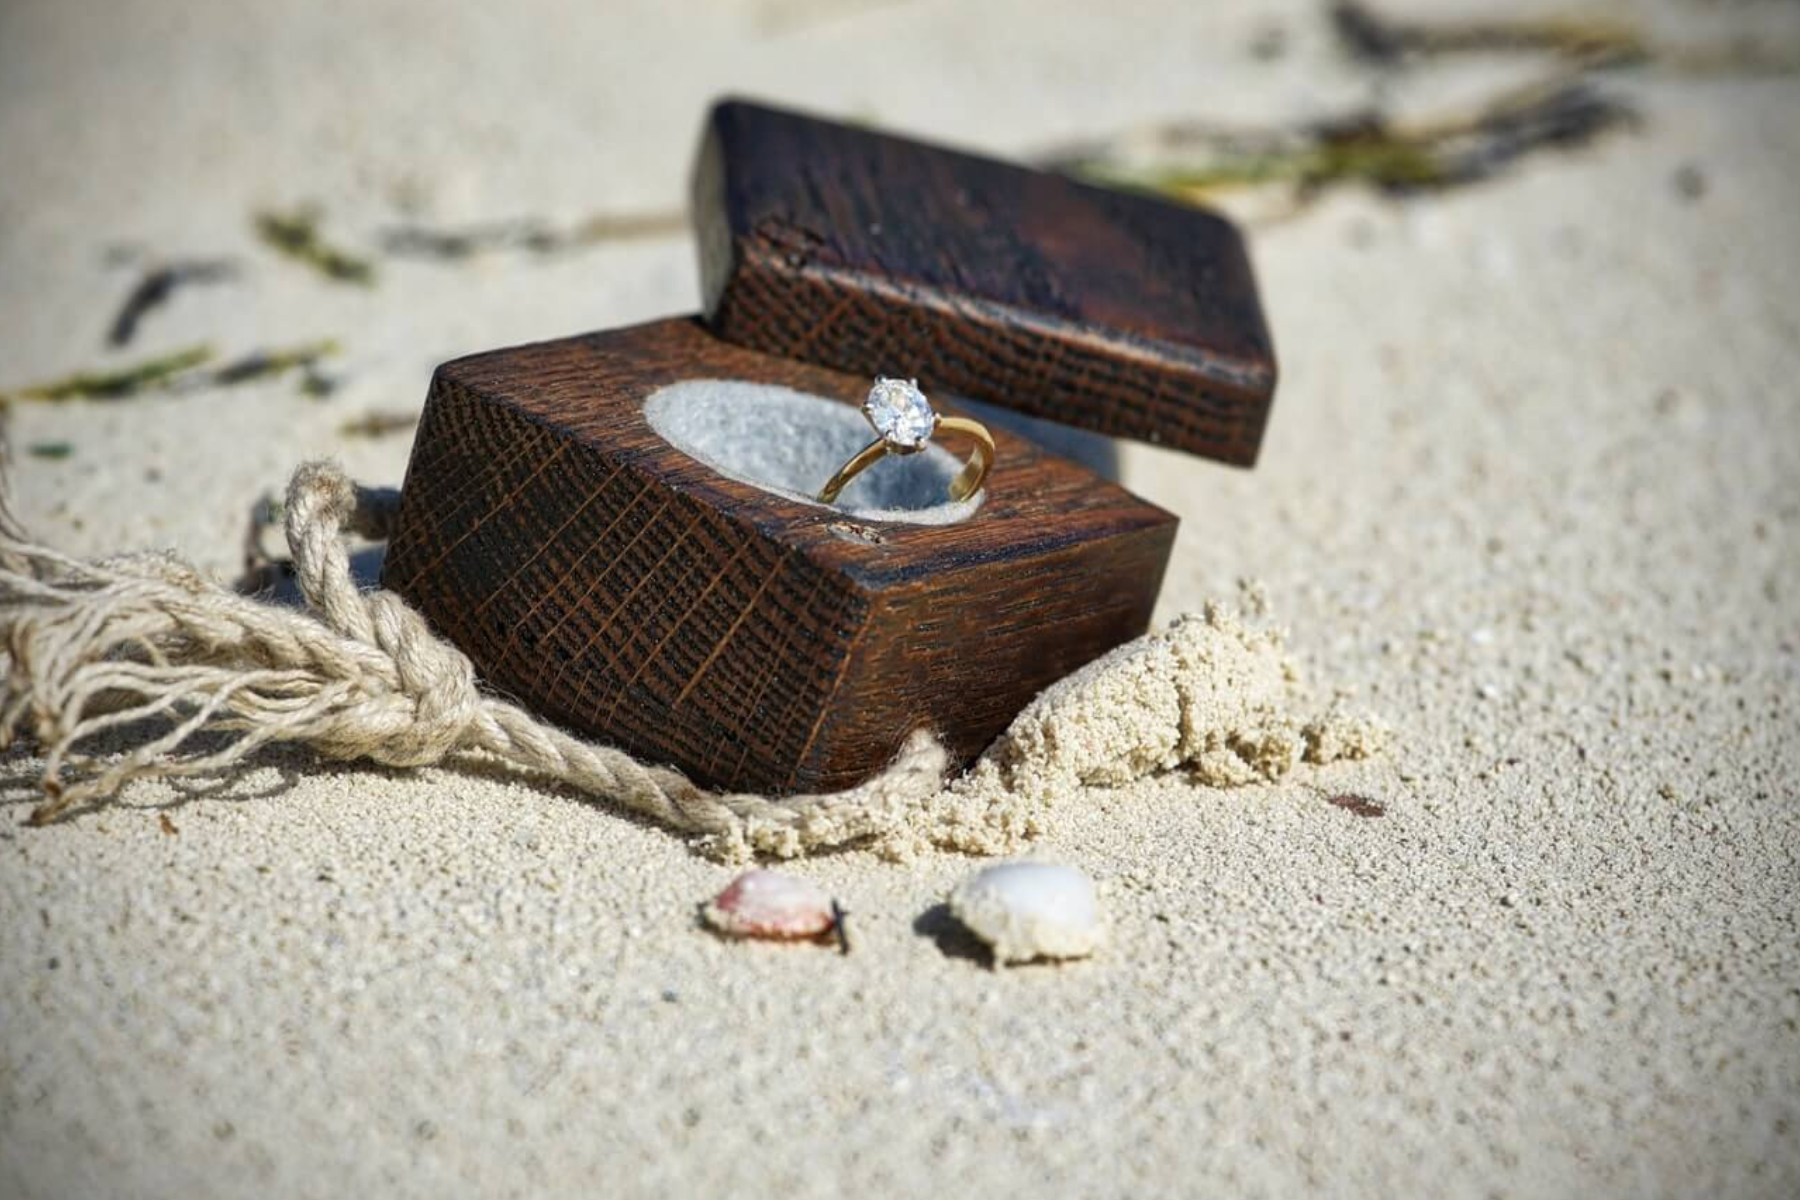 At the beach's sand, an oval-cut diamond engagement ring is displayed in a wooden box